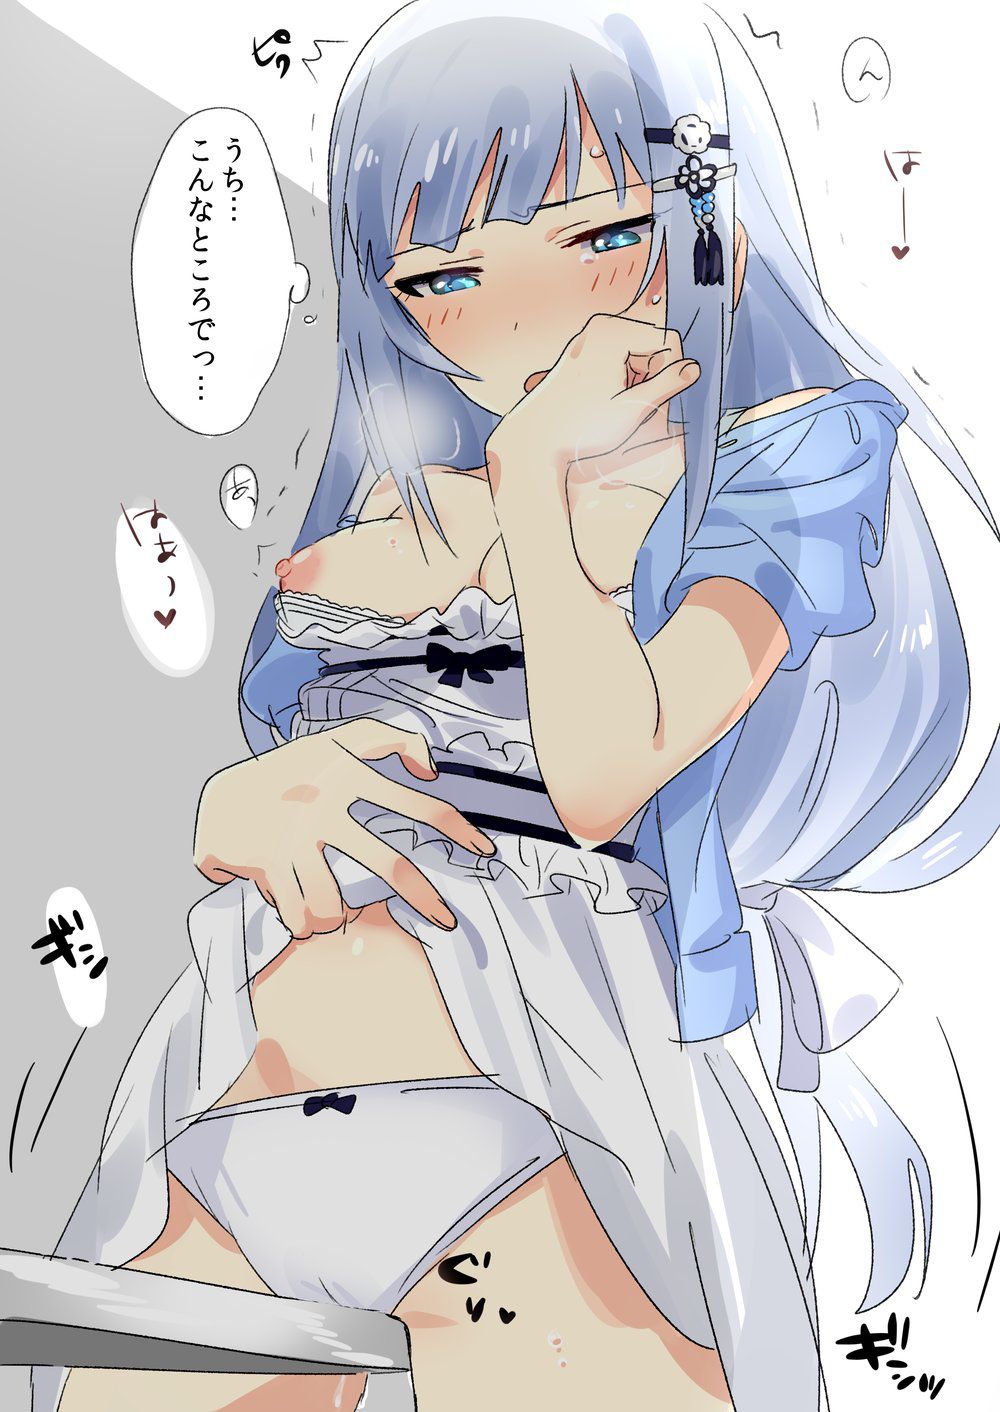 【Secondary erotic】 Here is the erotic image of a girl who is trying to feel comfortable by rubbing the 7